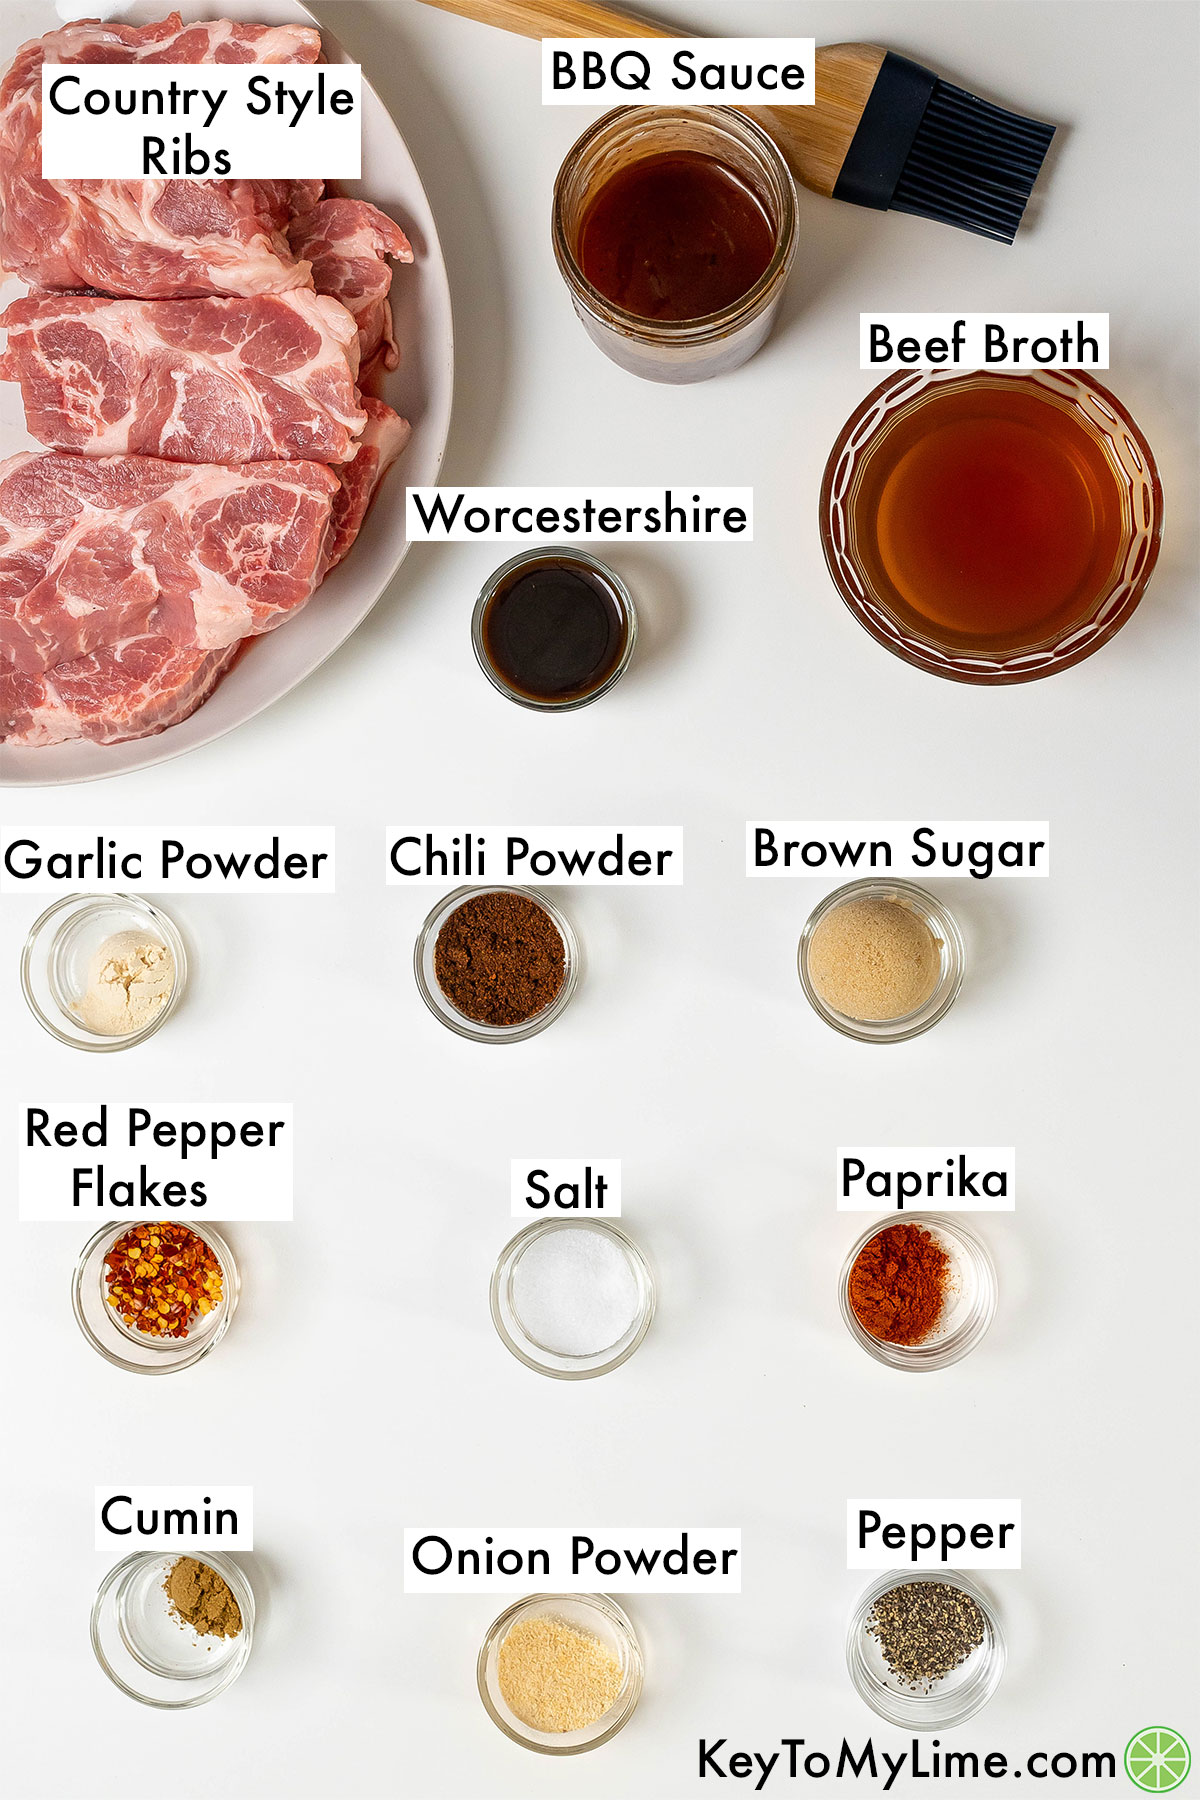 The labeled ingredients for Instant Pot country style ribs.